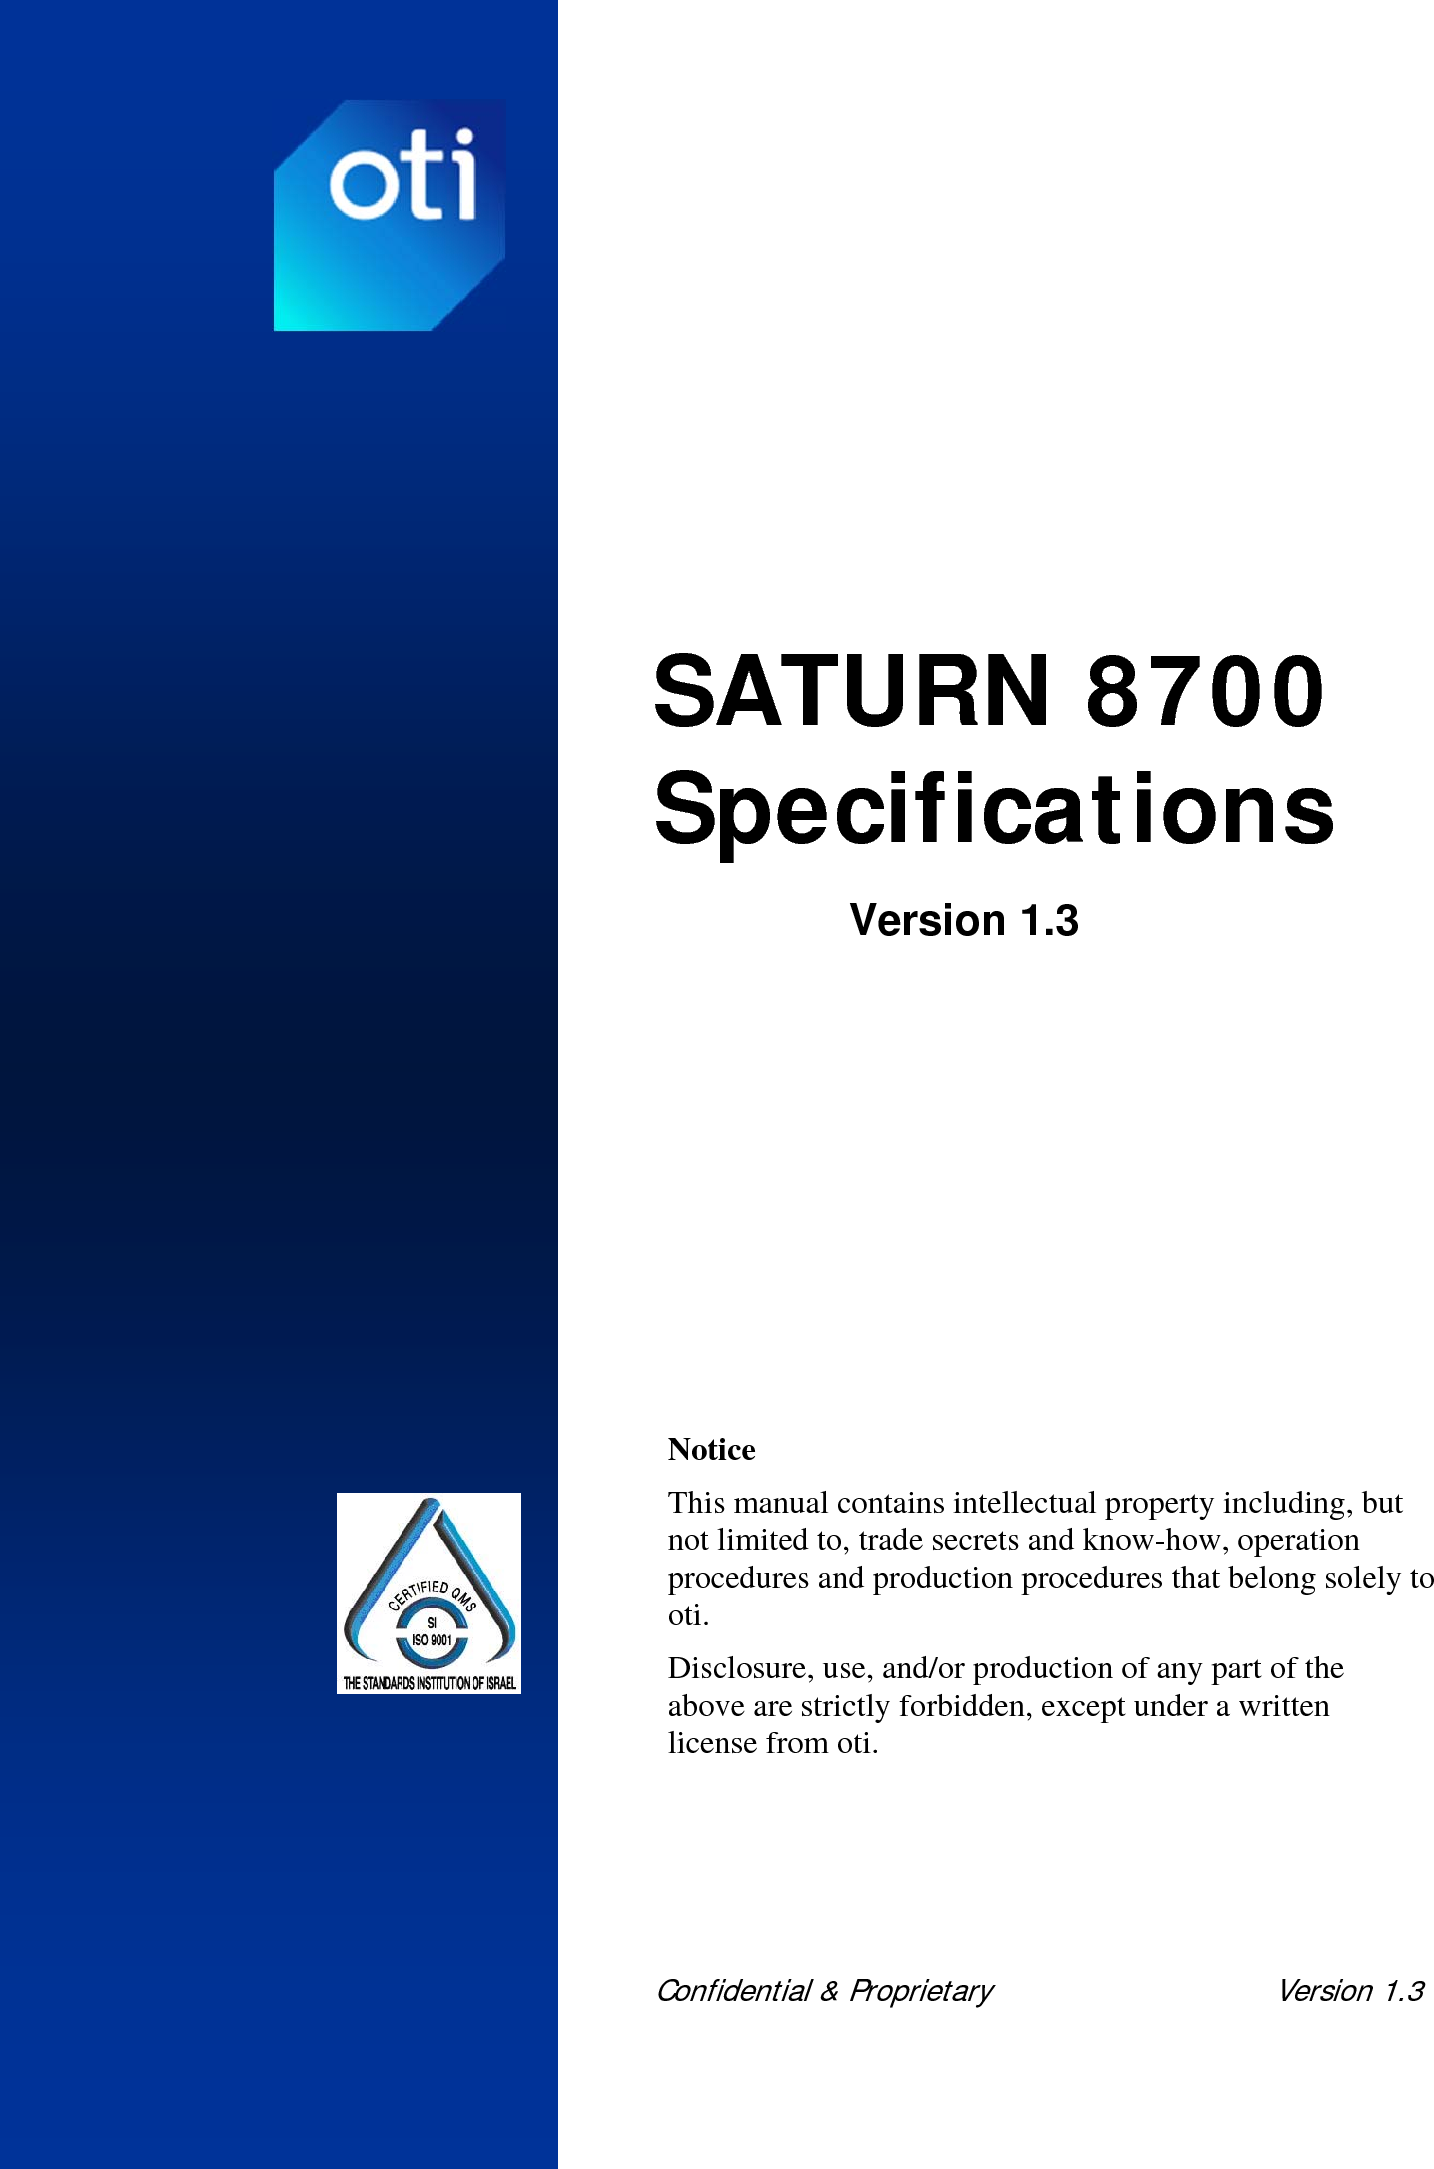  Confidential &amp; Proprietary   Version 1.3    SATURN 8700 Specifications Version 1.3     Notice This manual contains intellectual property including, but not limited to, trade secrets and know-how, operation procedures and production procedures that belong solely to oti. Disclosure, use, and/or production of any part of the above are strictly forbidden, except under a written license from oti. 